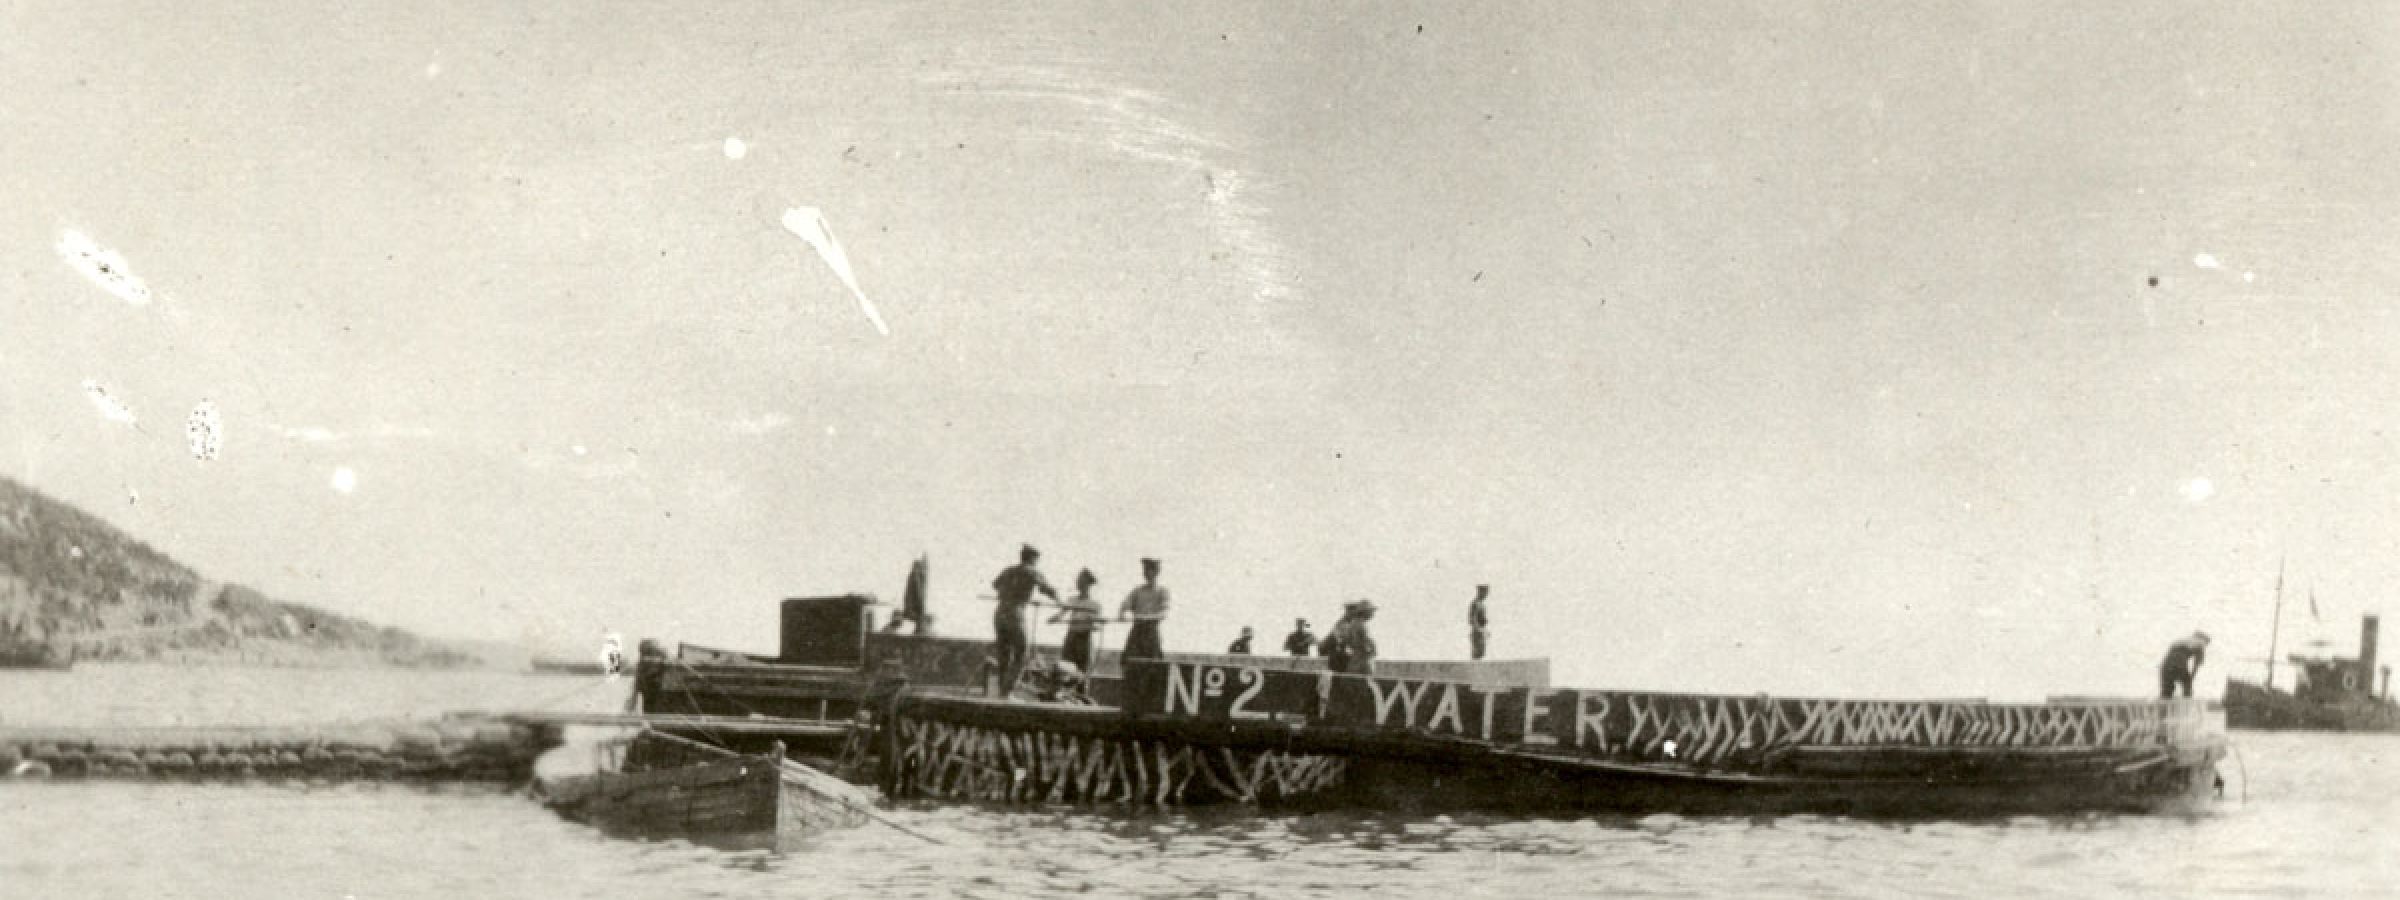 Engineers pump water ashore from a water barge. Ari Burnu is visible in the background.